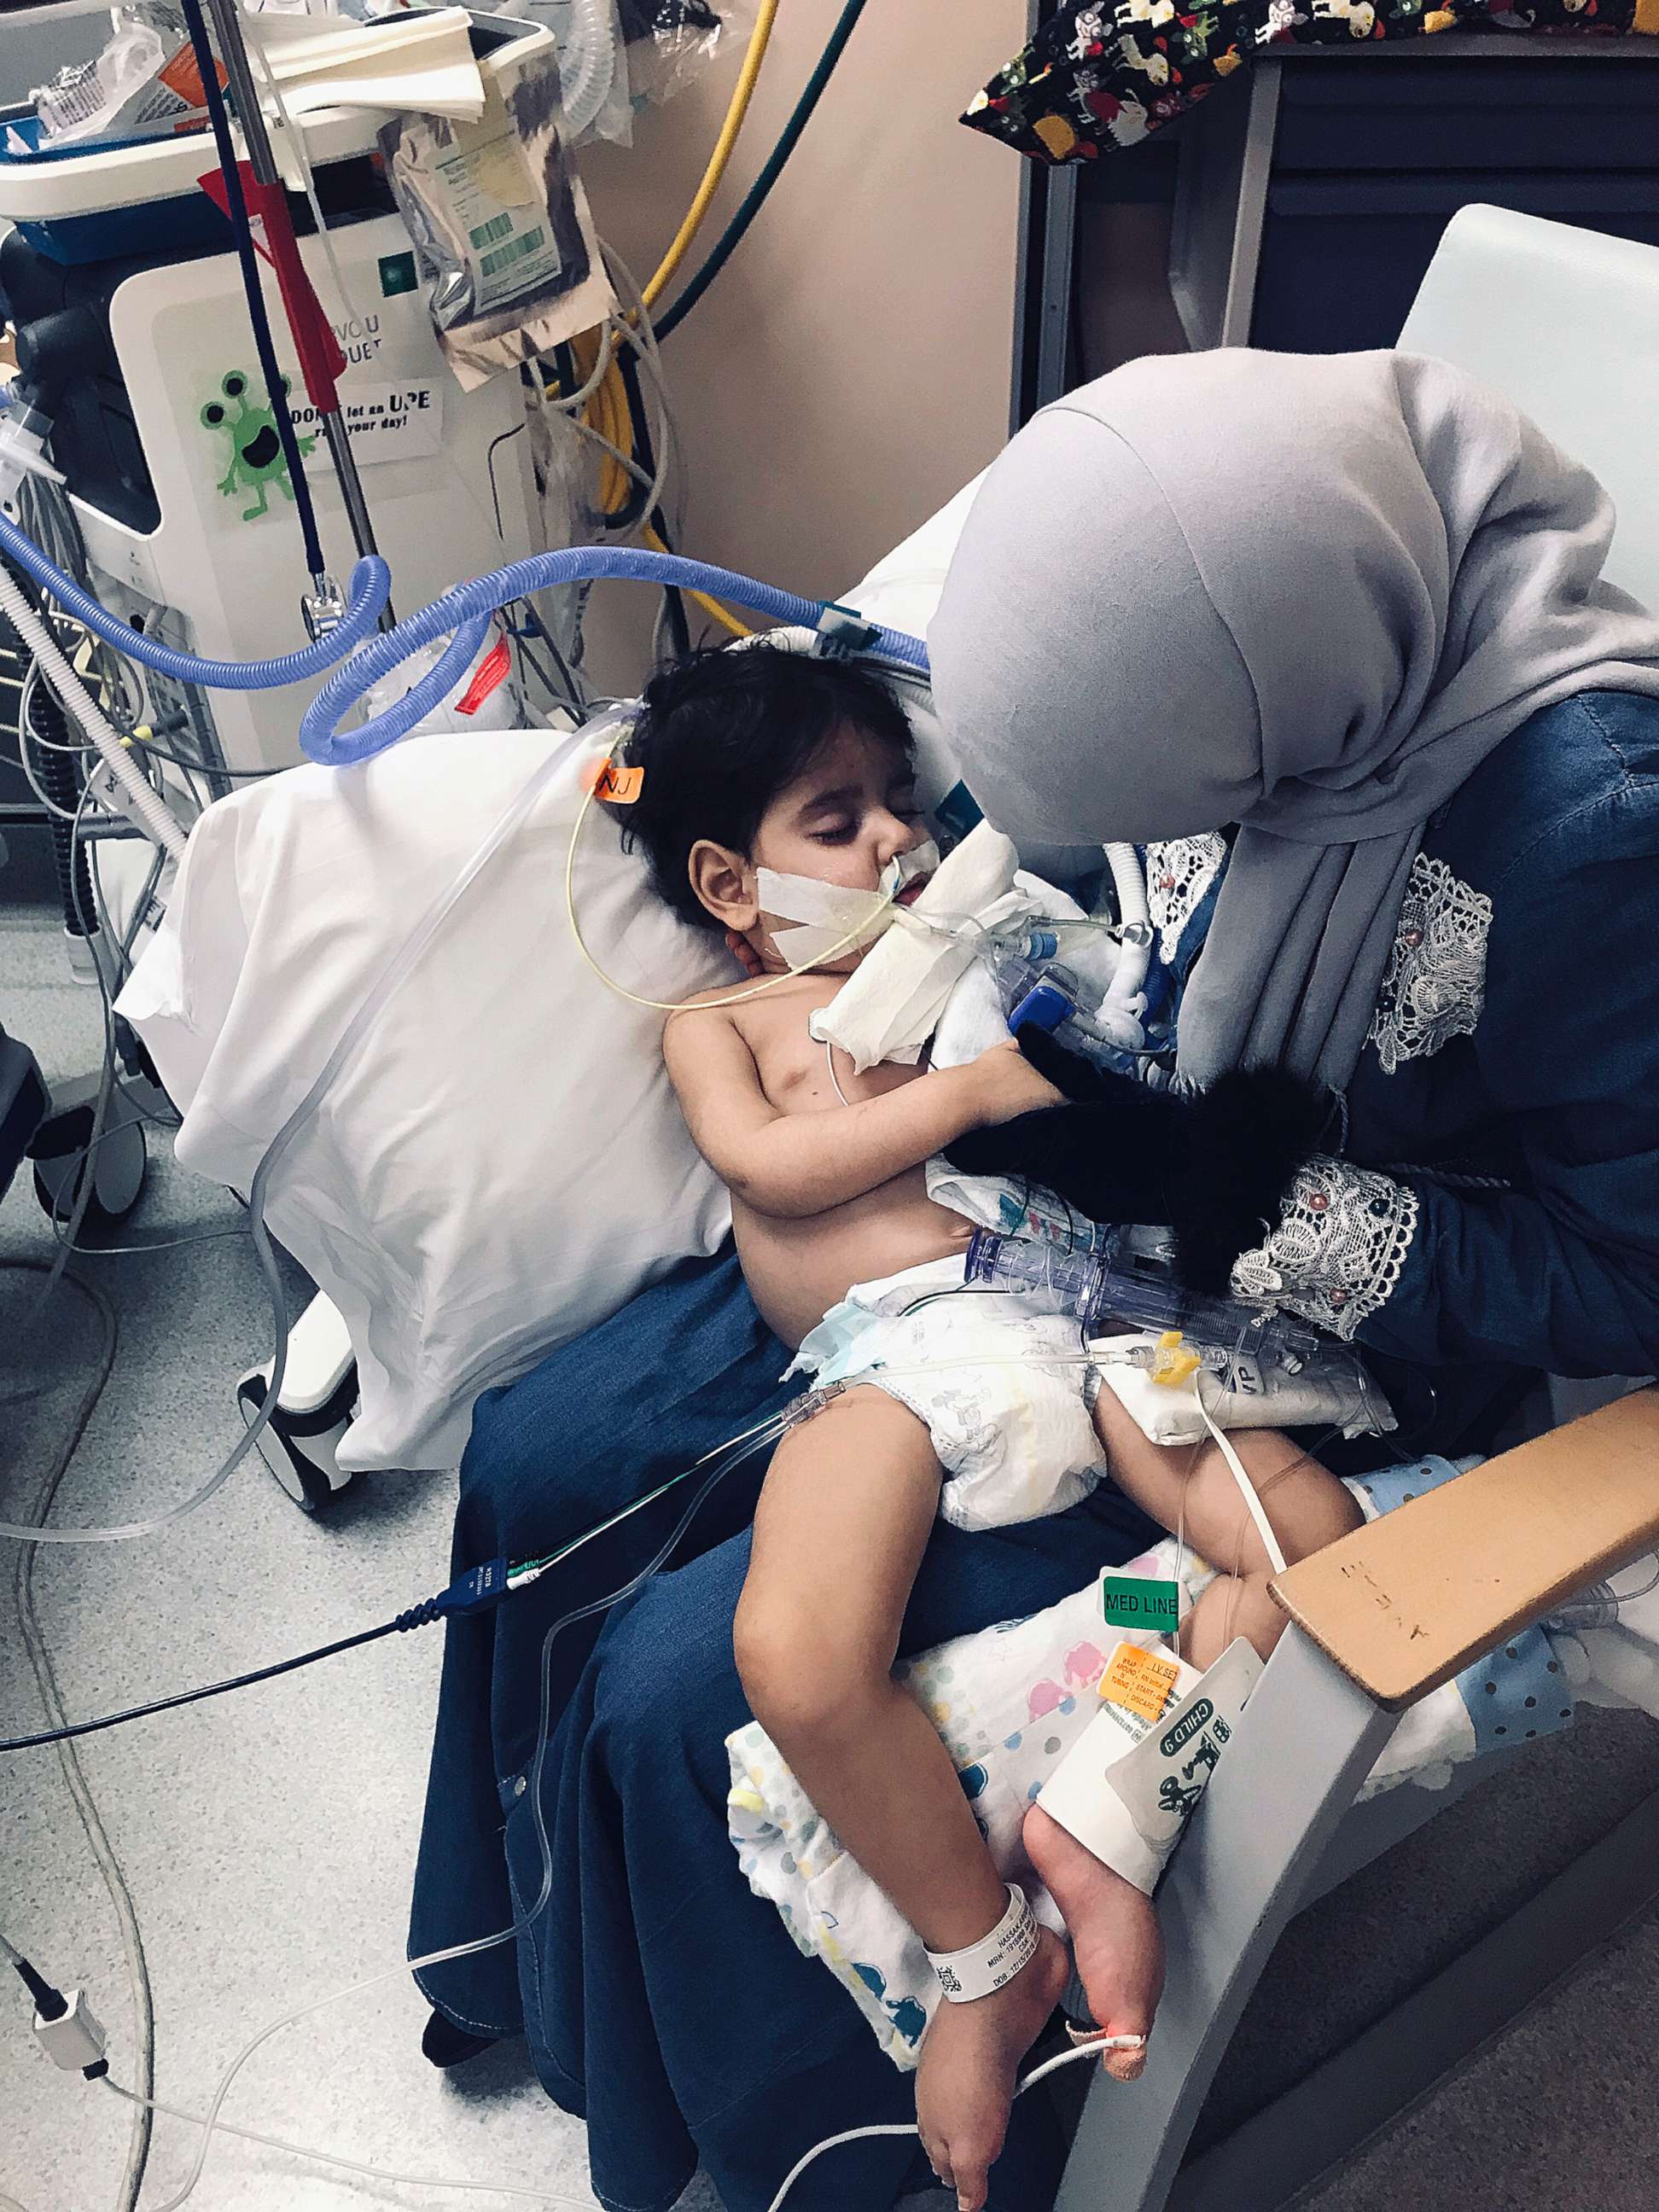 PHOTO: Shaima Swileh holds her dying 2-year-old son Abdullah at a hospital in Oakland, Calif., Dec. 19, 2018, in a photo released by the Council on American-Islamic Relations, Sacramento Valley.